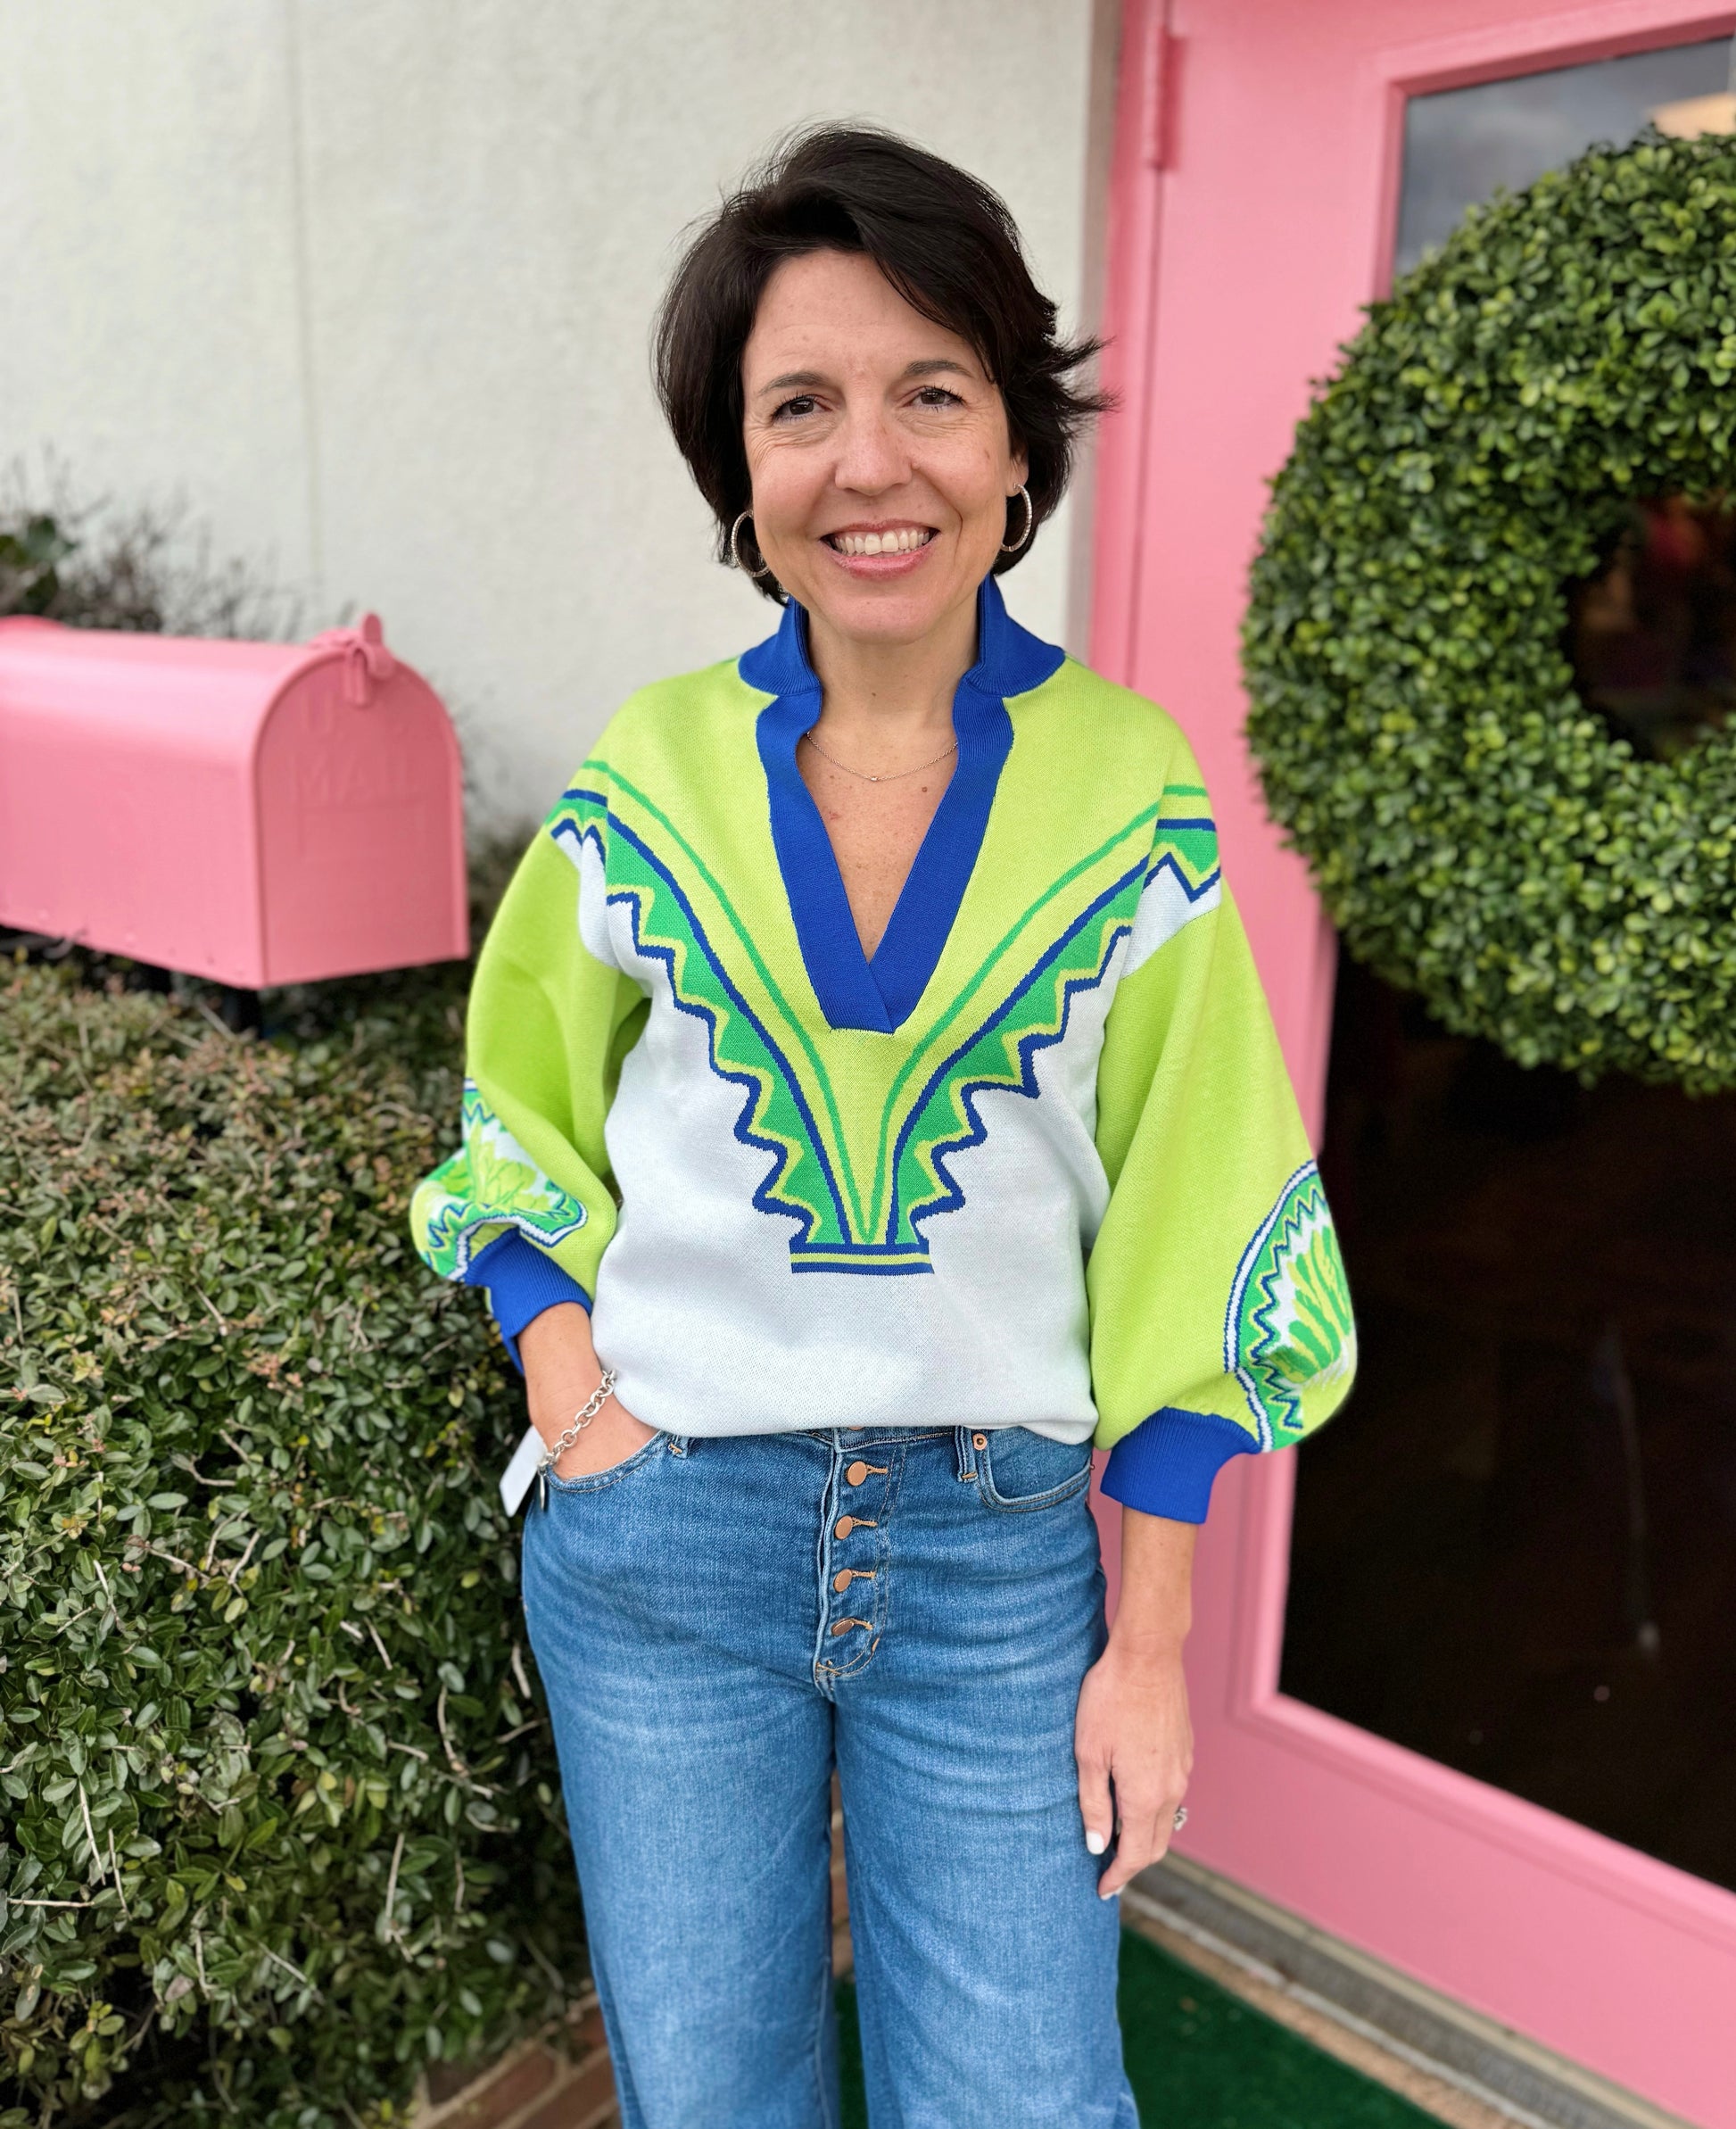 Lolli Sweater in Deco Palm by Emily McCarthy